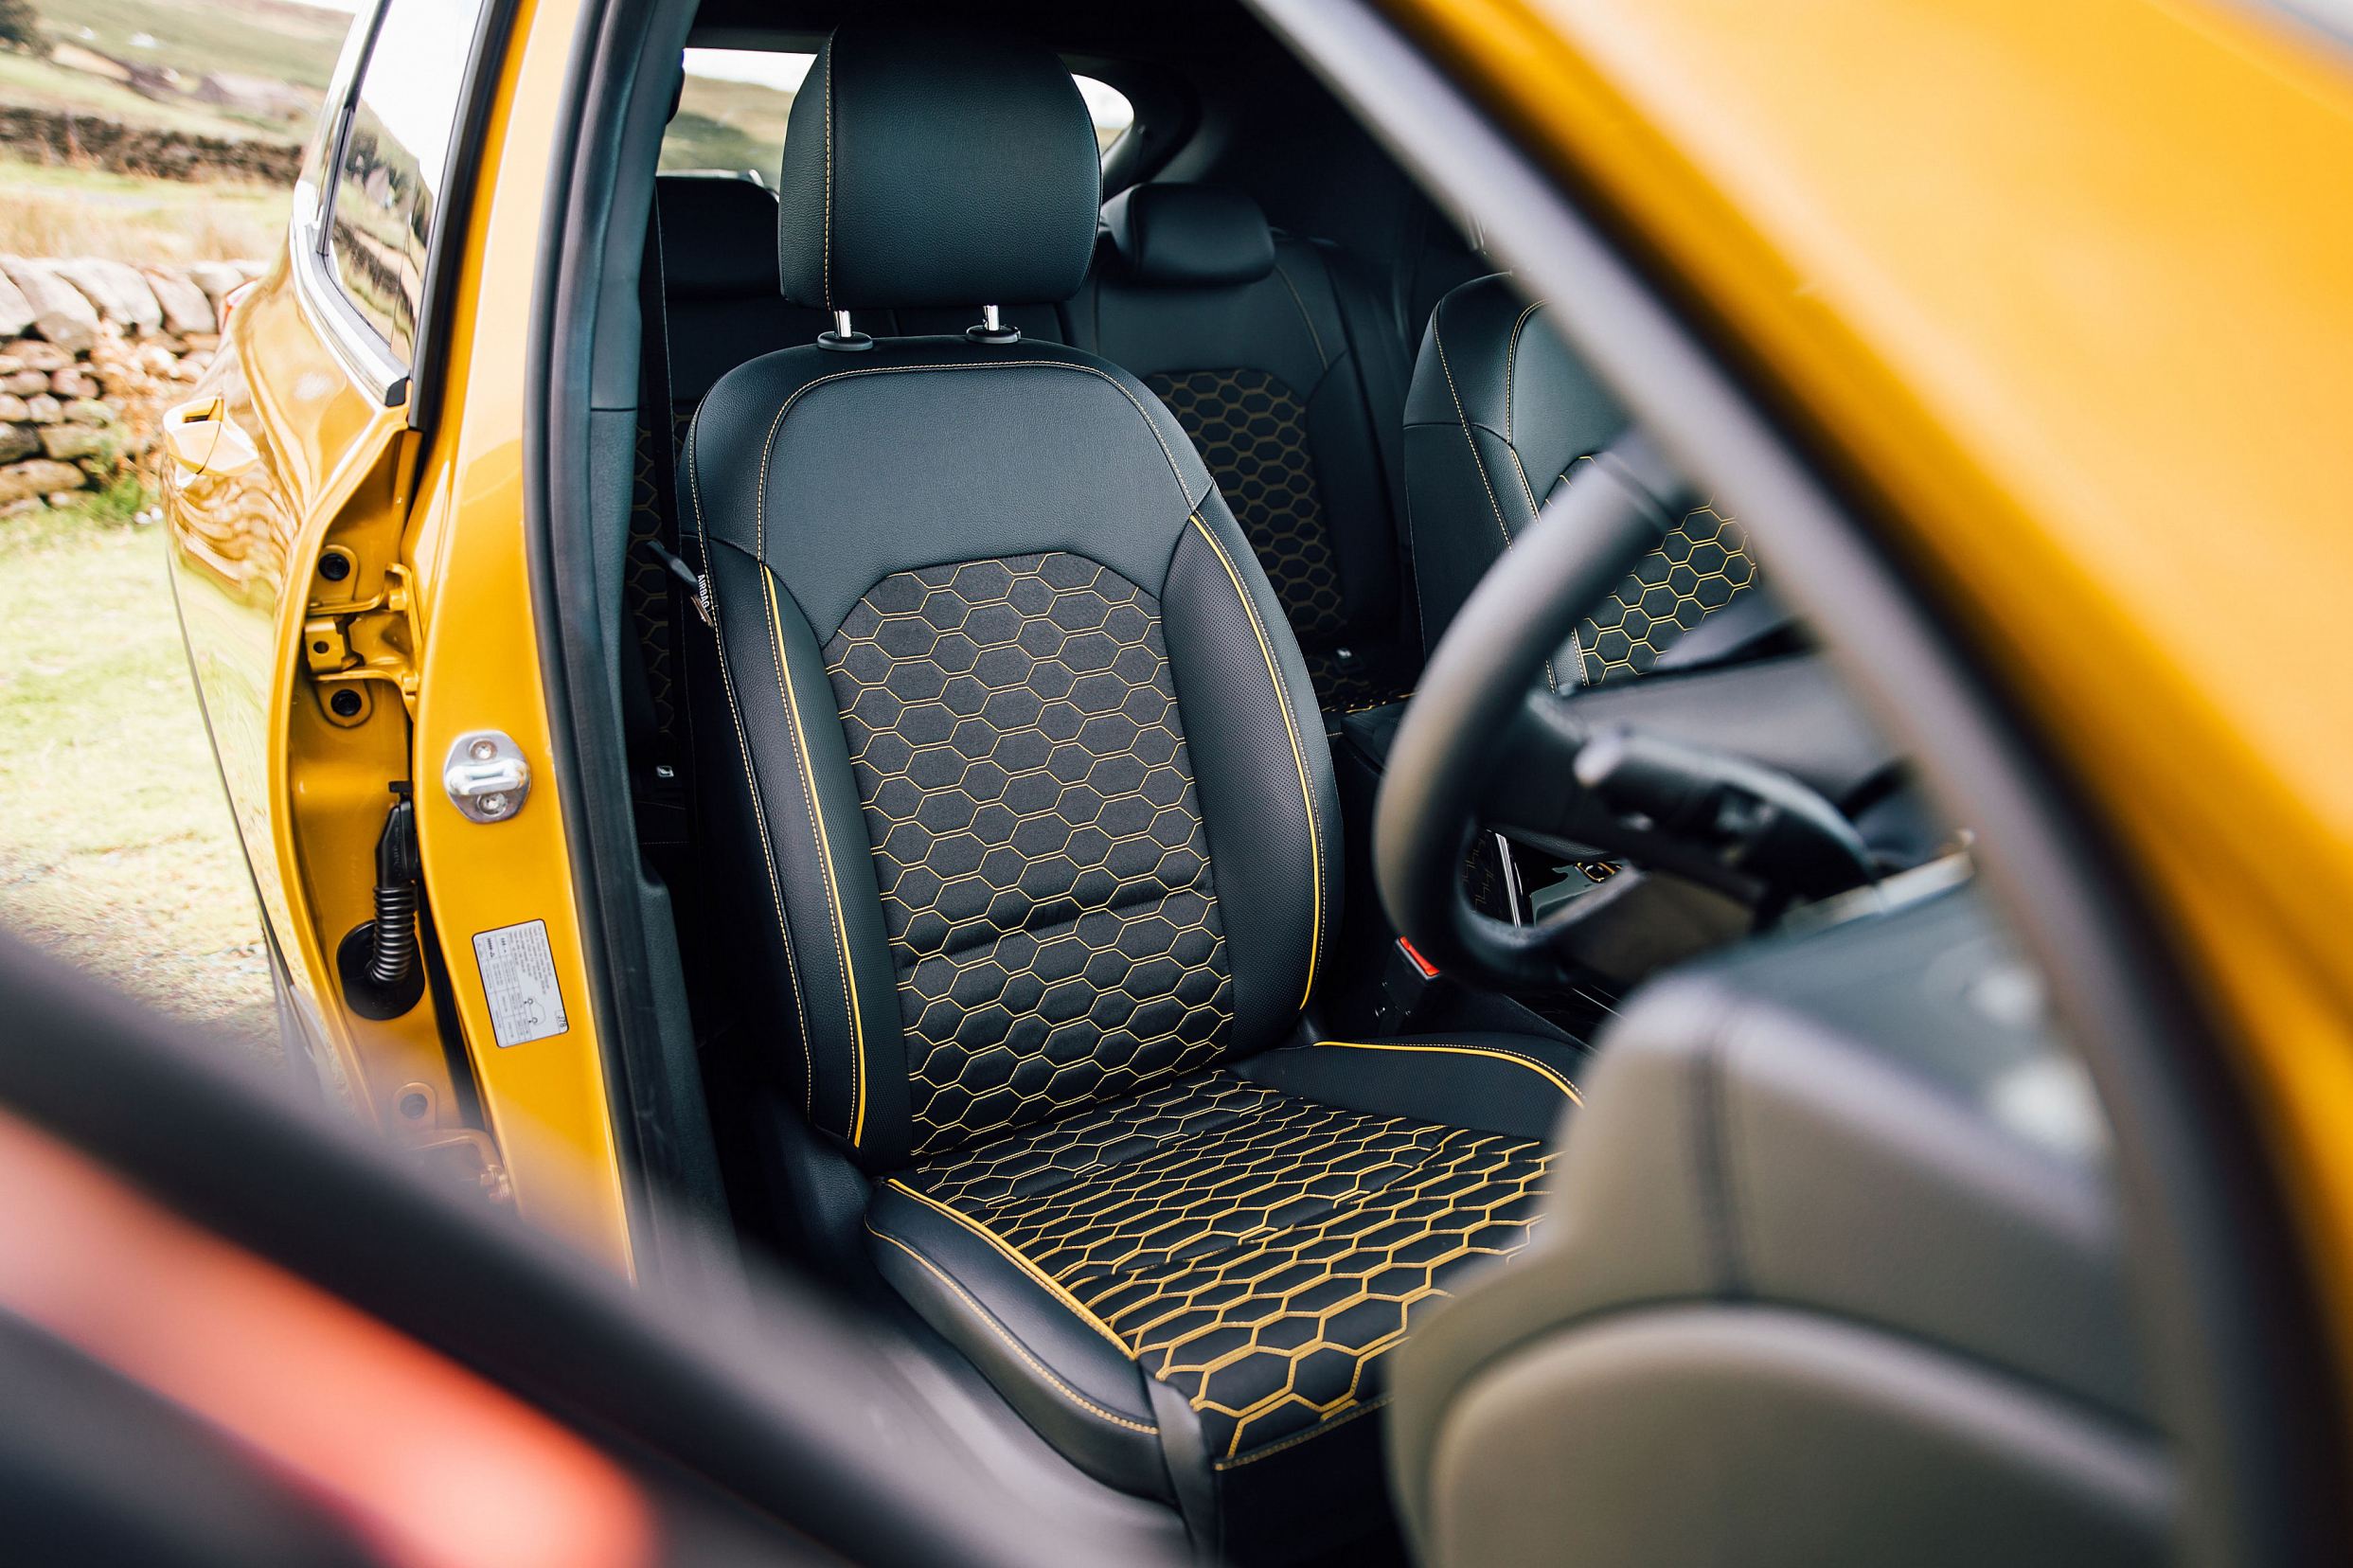 TO FIT KIA XCEED,CAR SEAT COVERS, BO-1 YELLOW SPORTS MESH, 2 FRONTS